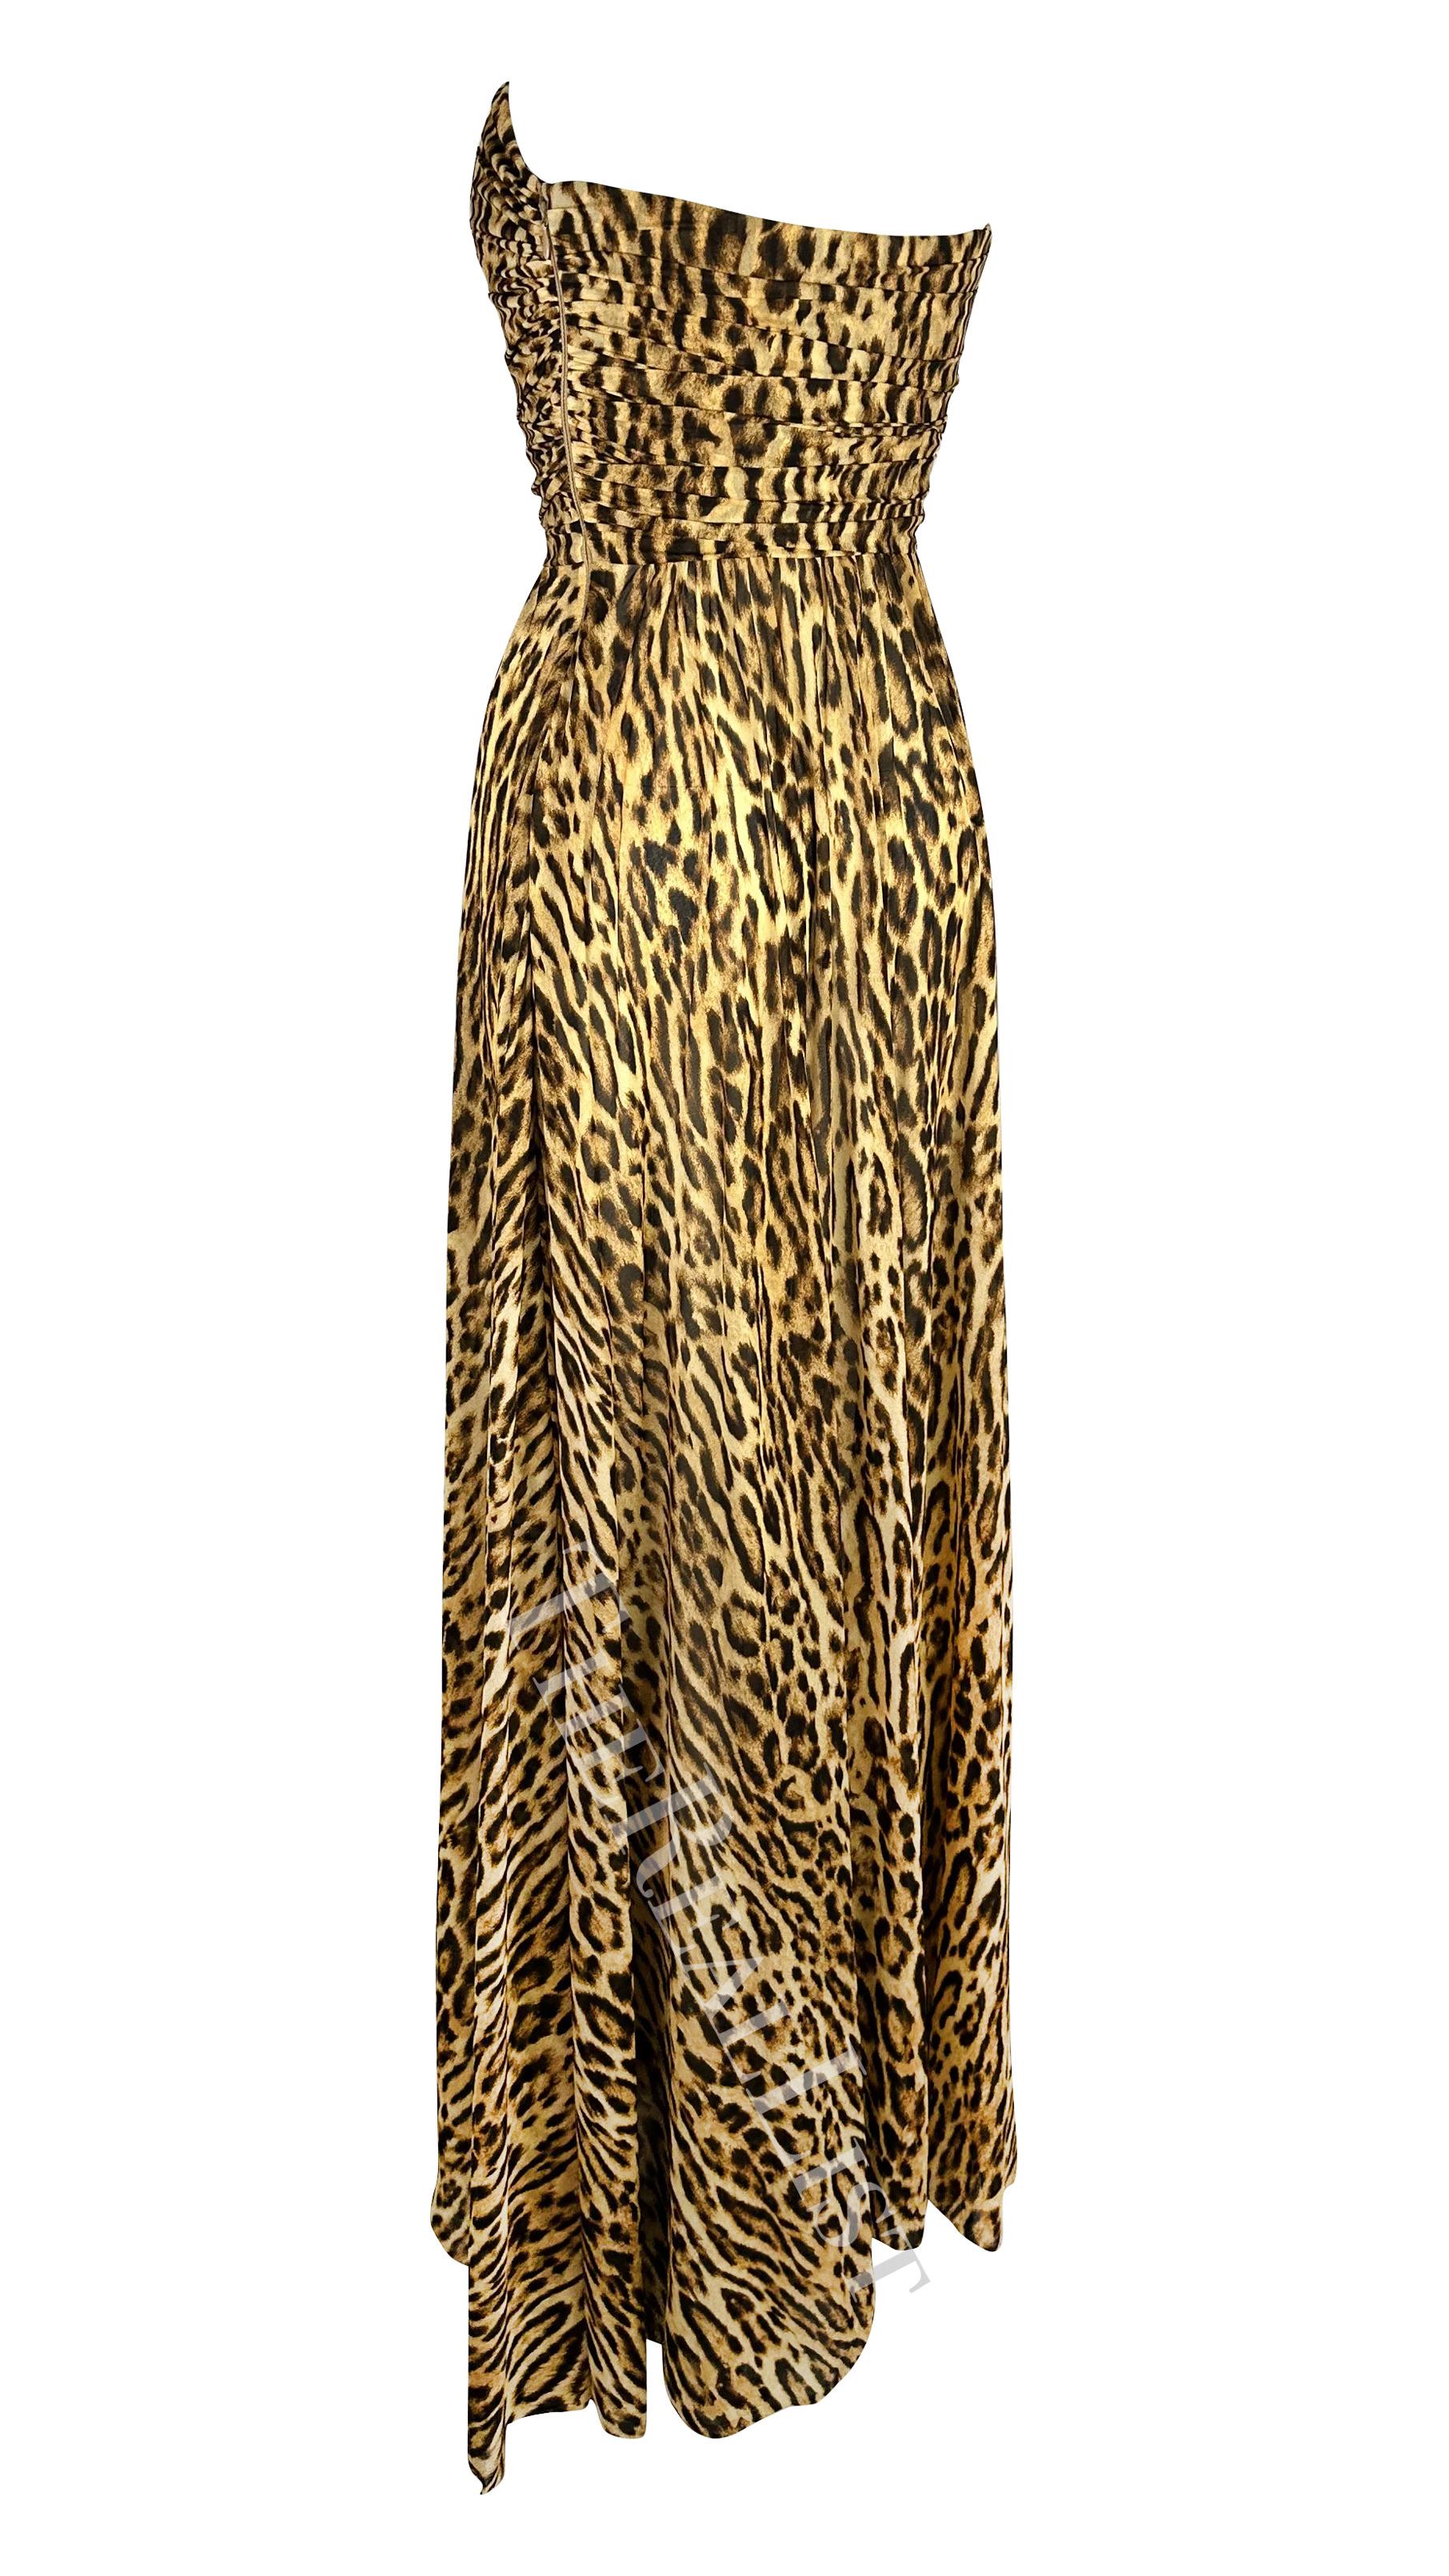 NWT F/W 2004 Celine by Michael Kors Runway Strapless Cheetah Print Gown  For Sale 4